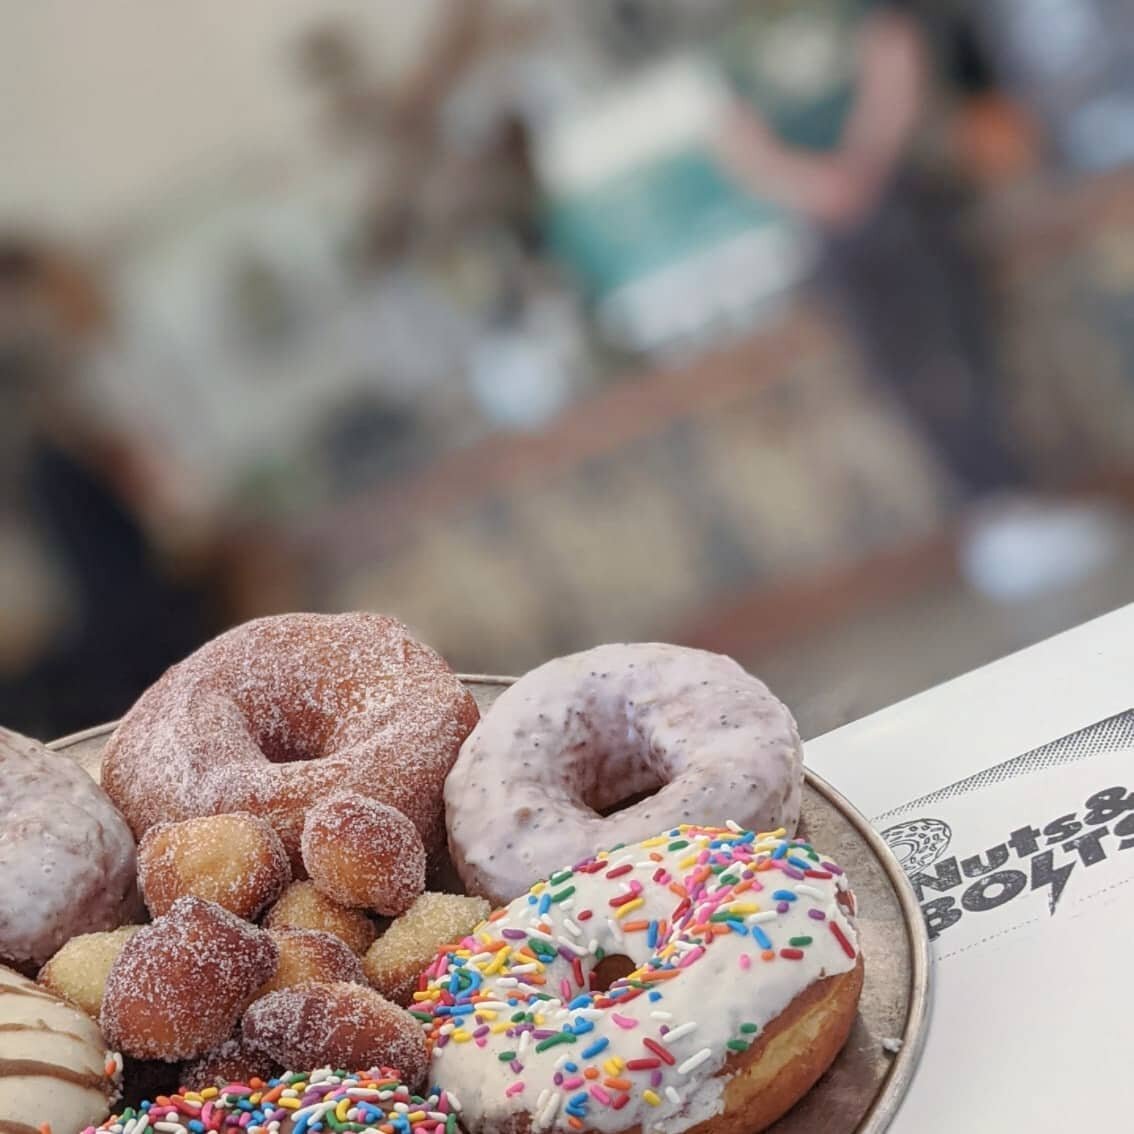 WE'RE BACK!!!

Come by @menottis Culver City tomorrow Friday July 23rd 8-11:30 for your favorite donuts AND MERCH!!!!

See you there 🍩⚡